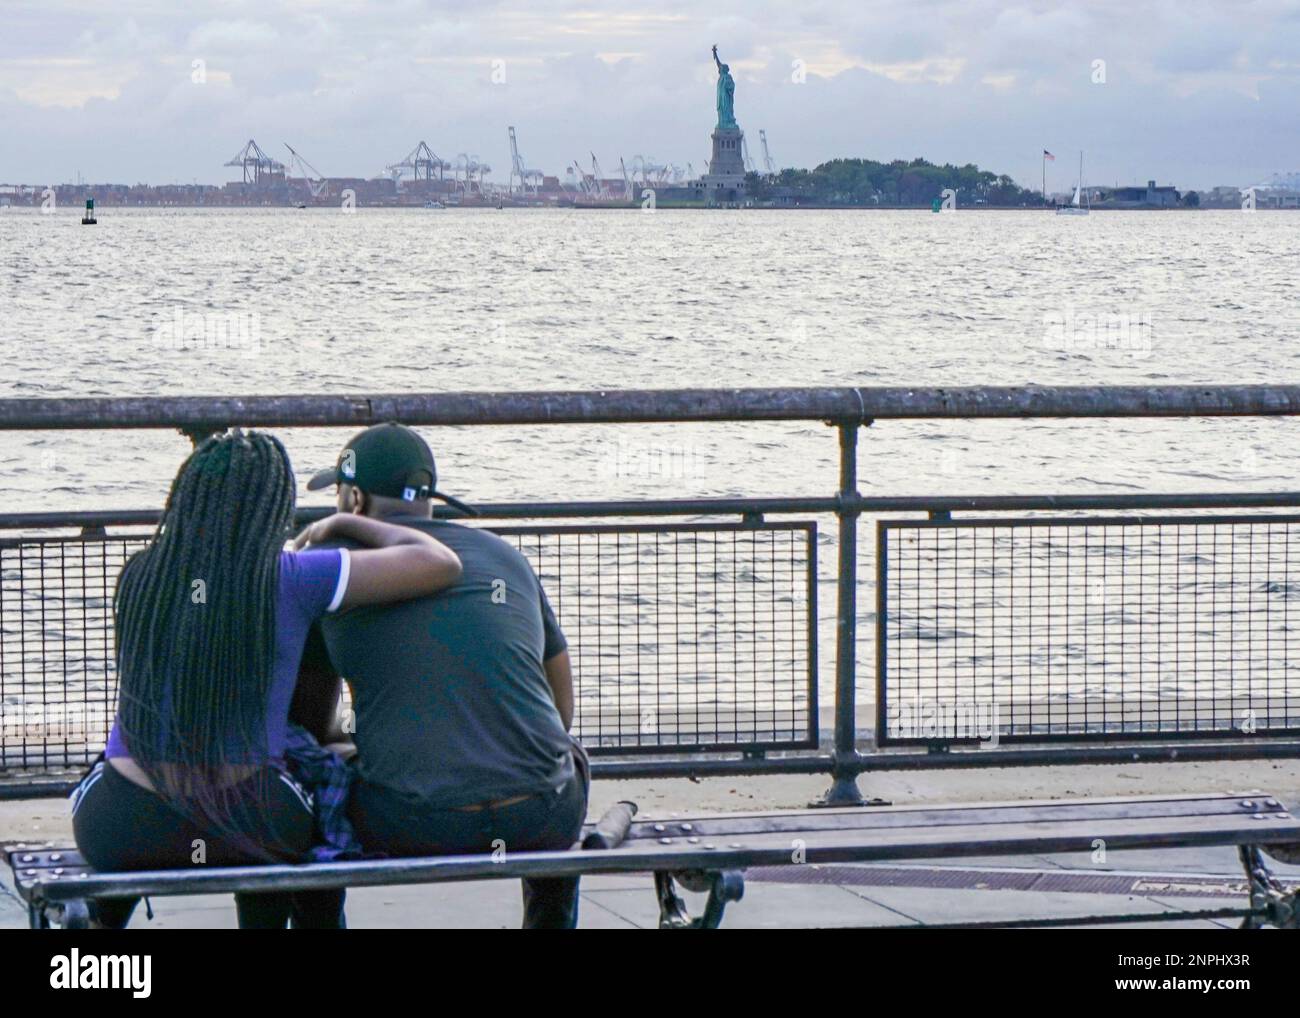 A couple enjoys the view of the Statue of Liberty from the Battery Park.New  York City is preparing to move into Phase 4 of re-opening following  restrictions imposed to curb the coronavirus